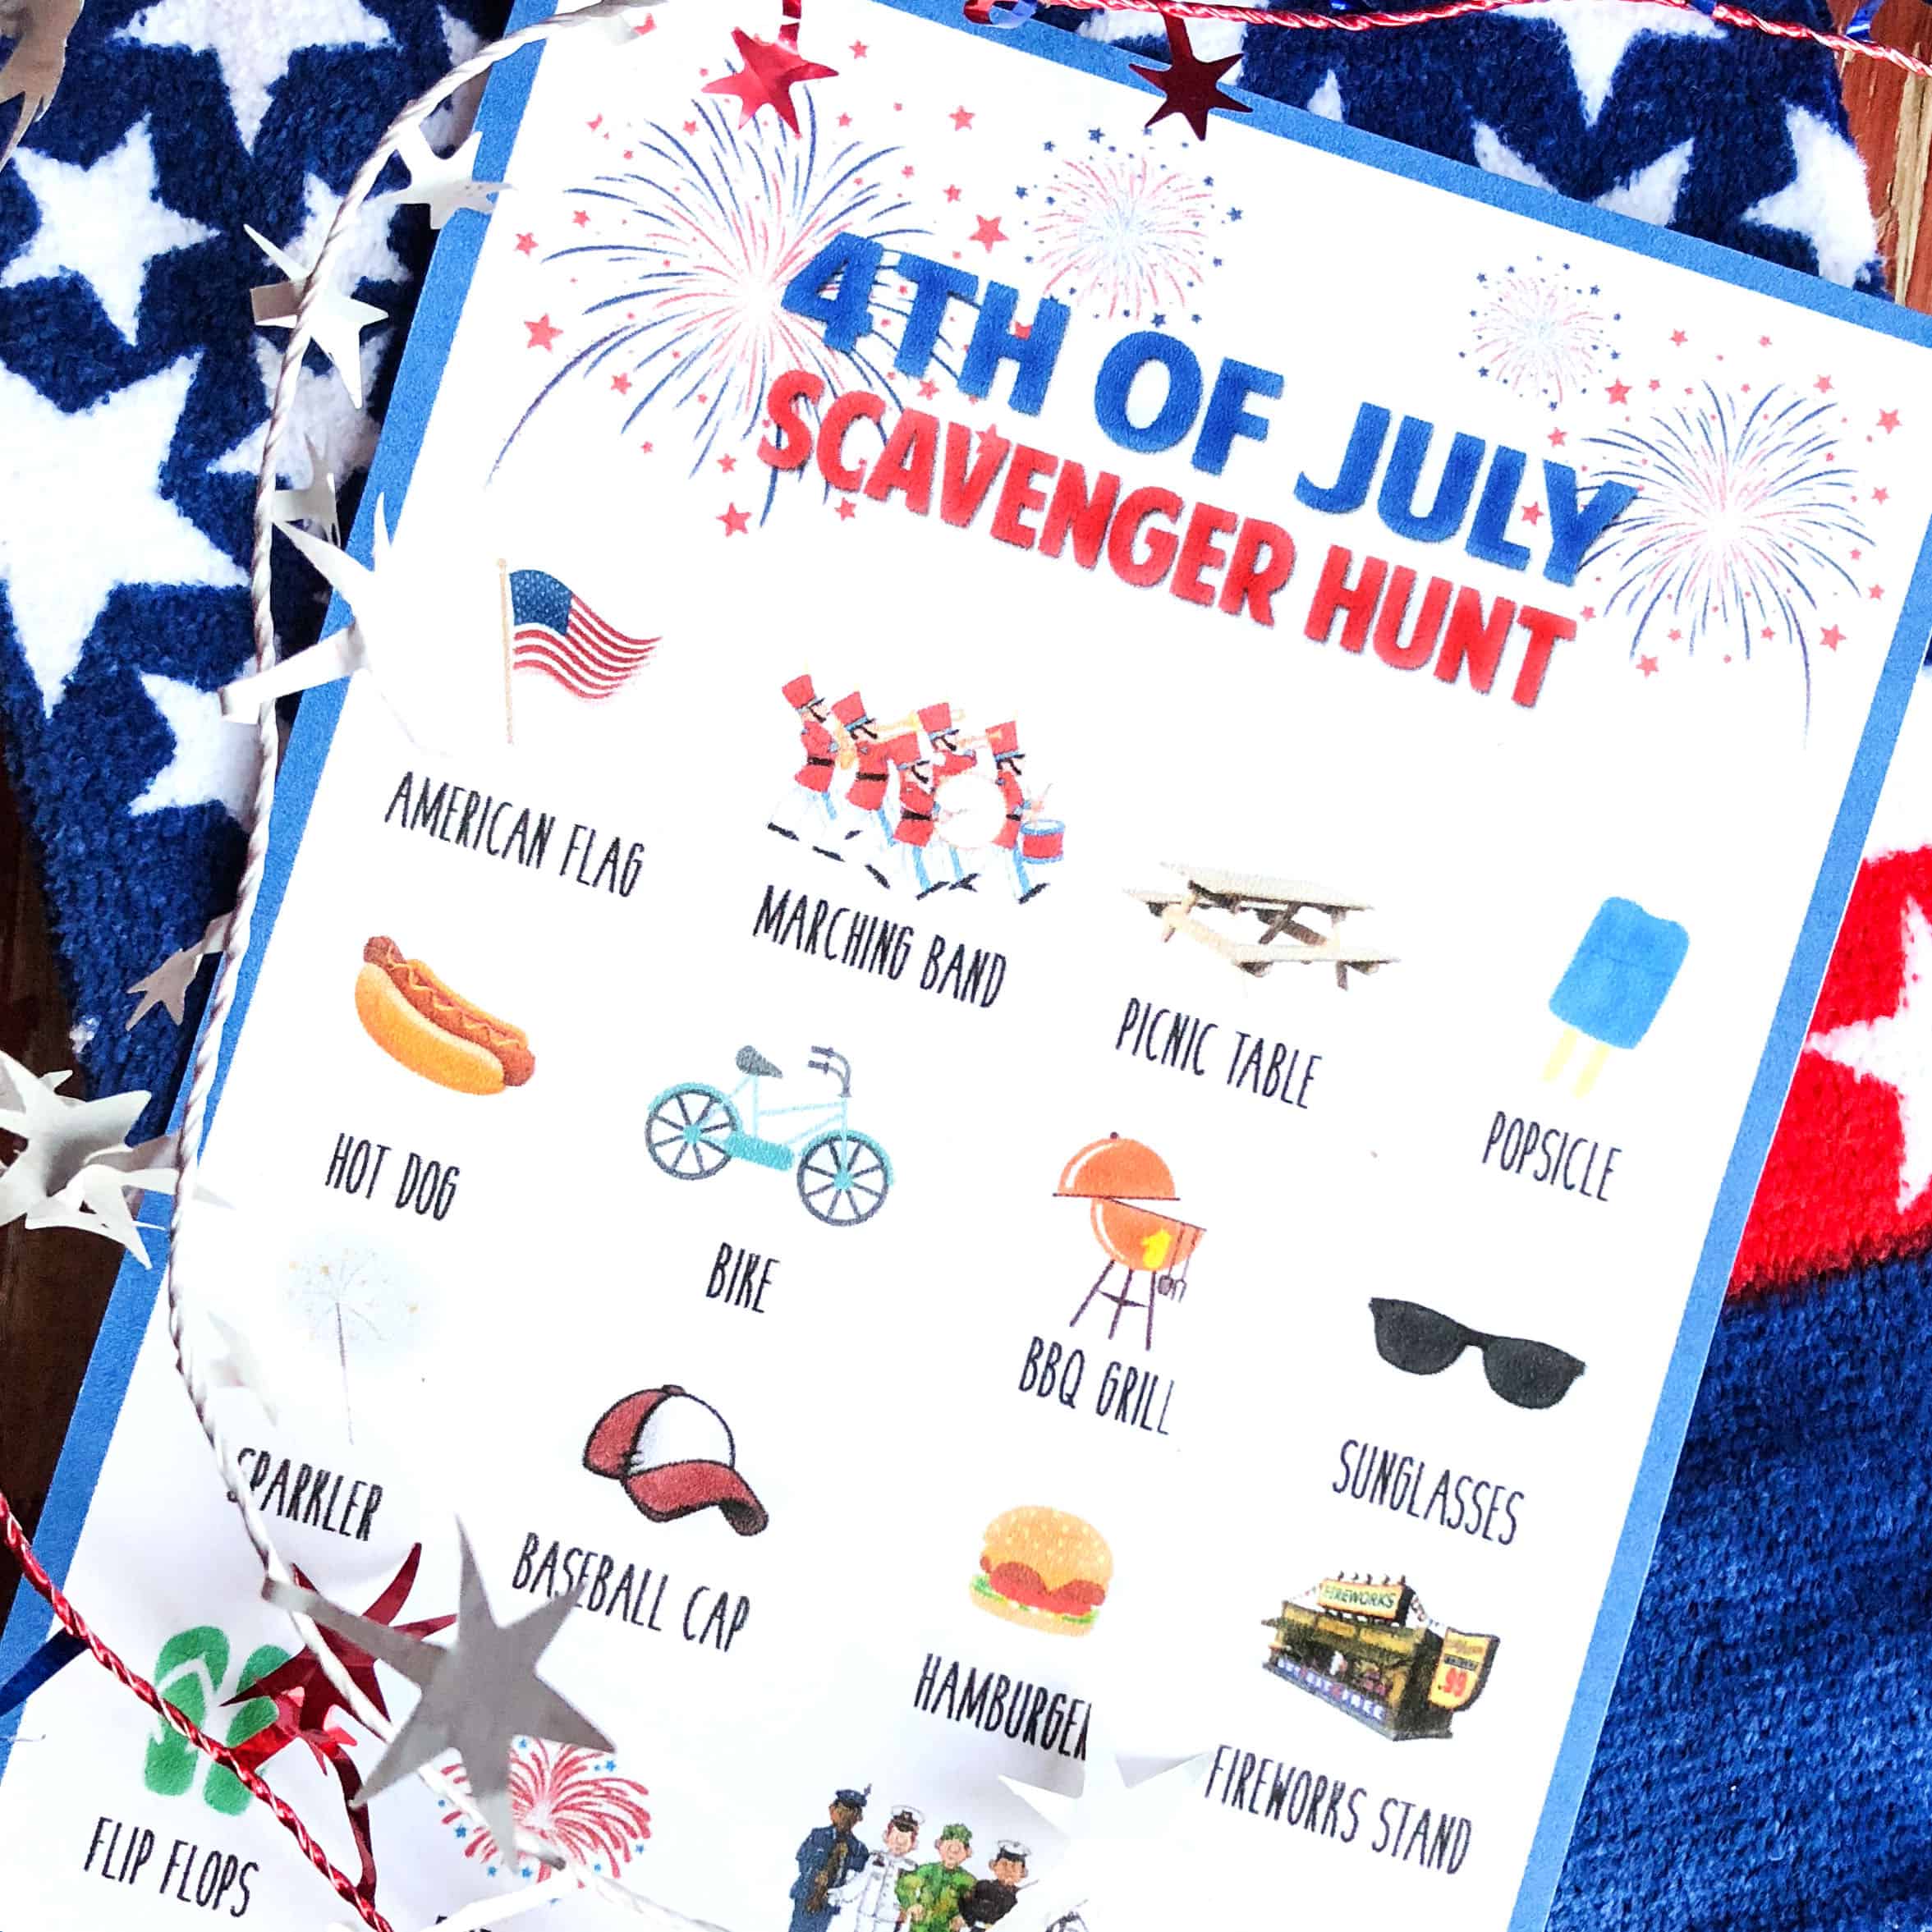 A Fourth of July scavenger hunt is so fun for the kids to do at a family barbecue or while waiting for the fireworks to start!